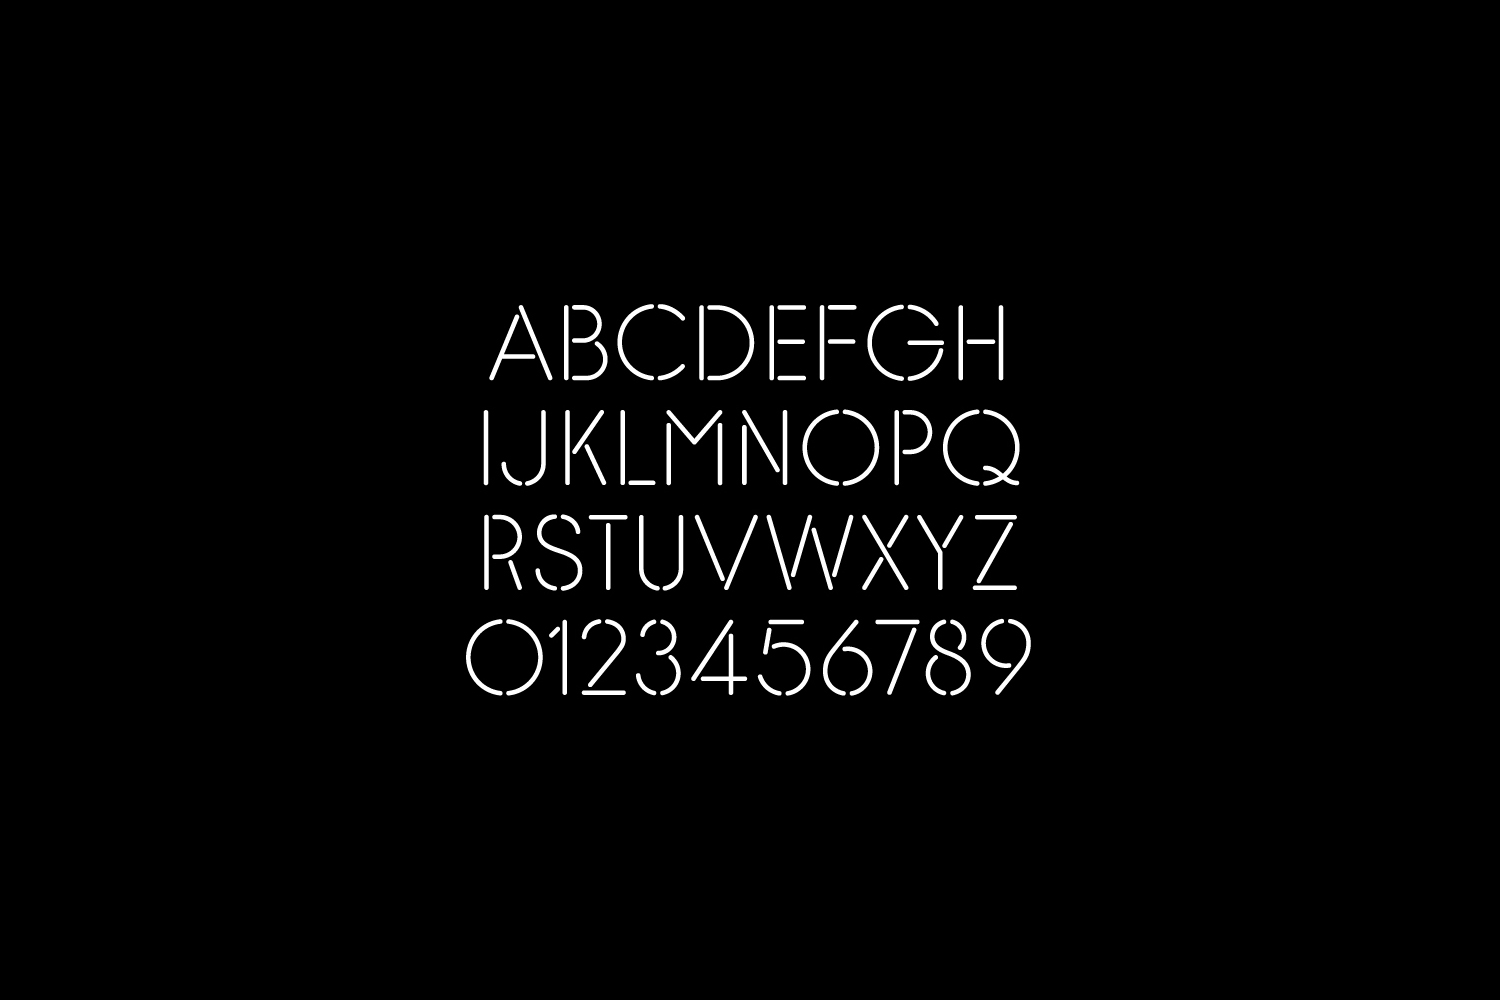 Custom typeface created by Studio Makgill for designer furniture and accessories retailer The Lollipop Shoppe